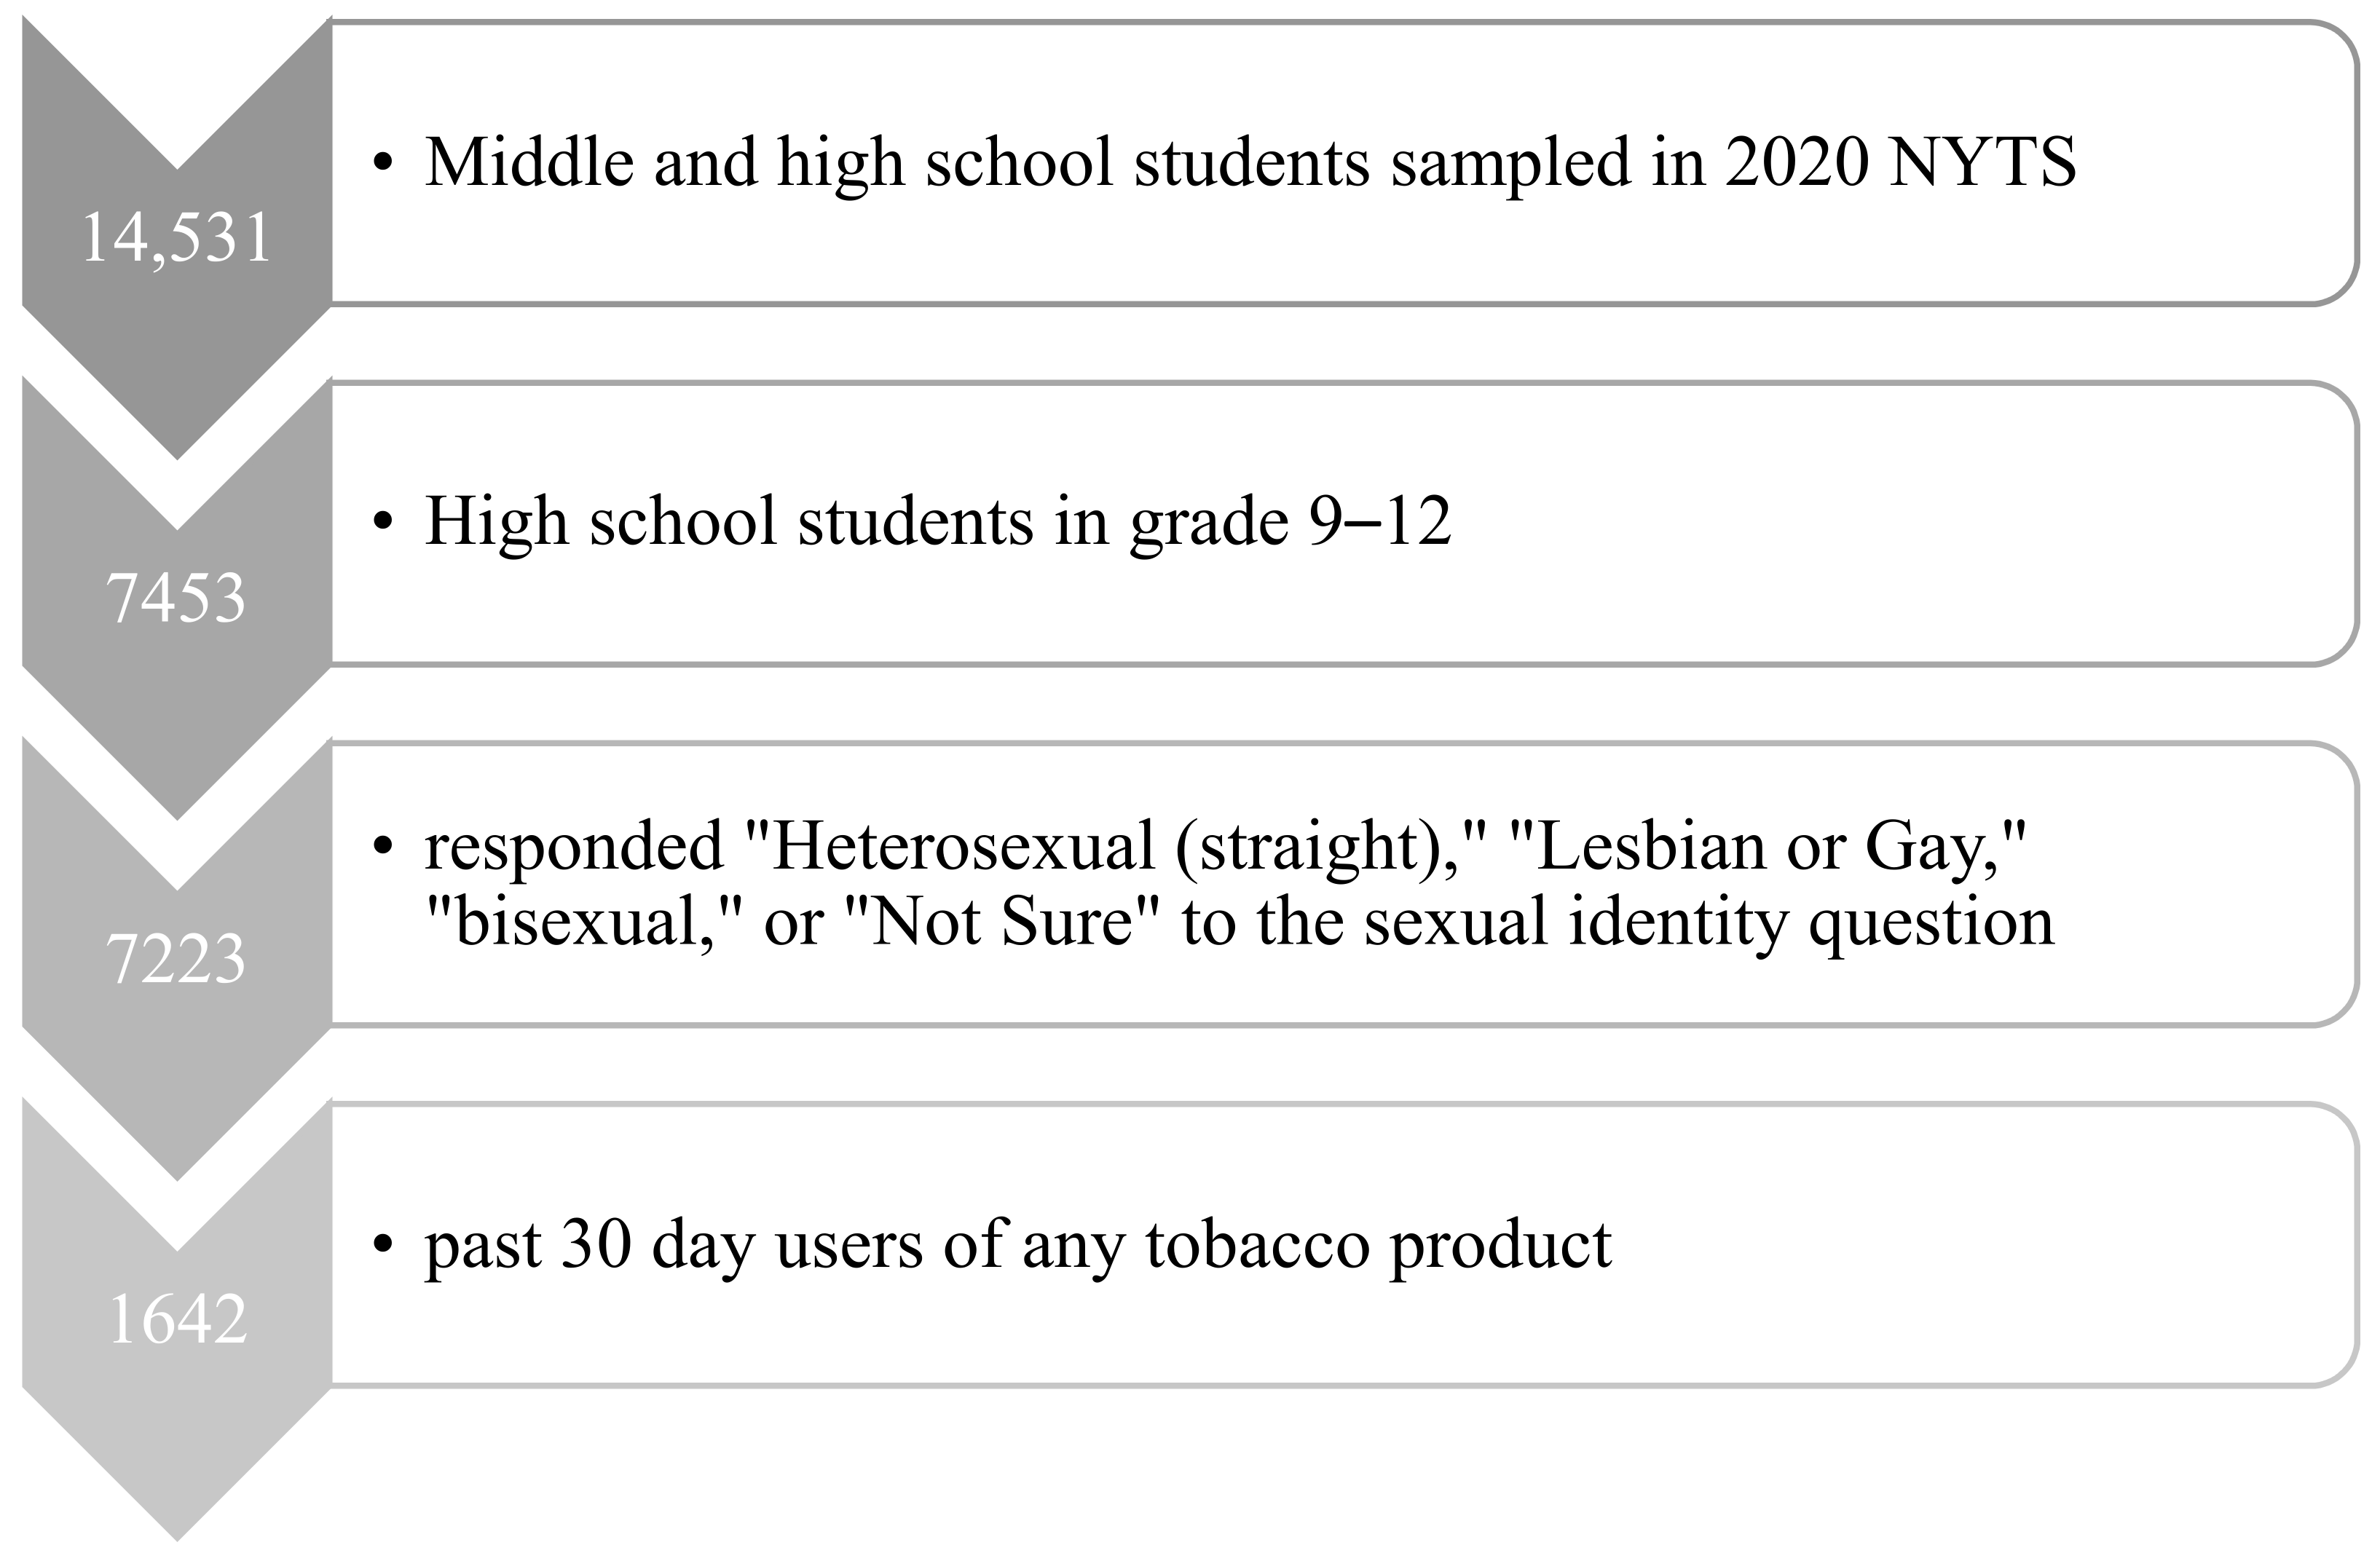 IJERPH Free Full-Text Tobacco Craving, Nicotine Dependence, and Quit Intentions among LGB and Non-LGB High School Students A Quasi-Experimental Analysis